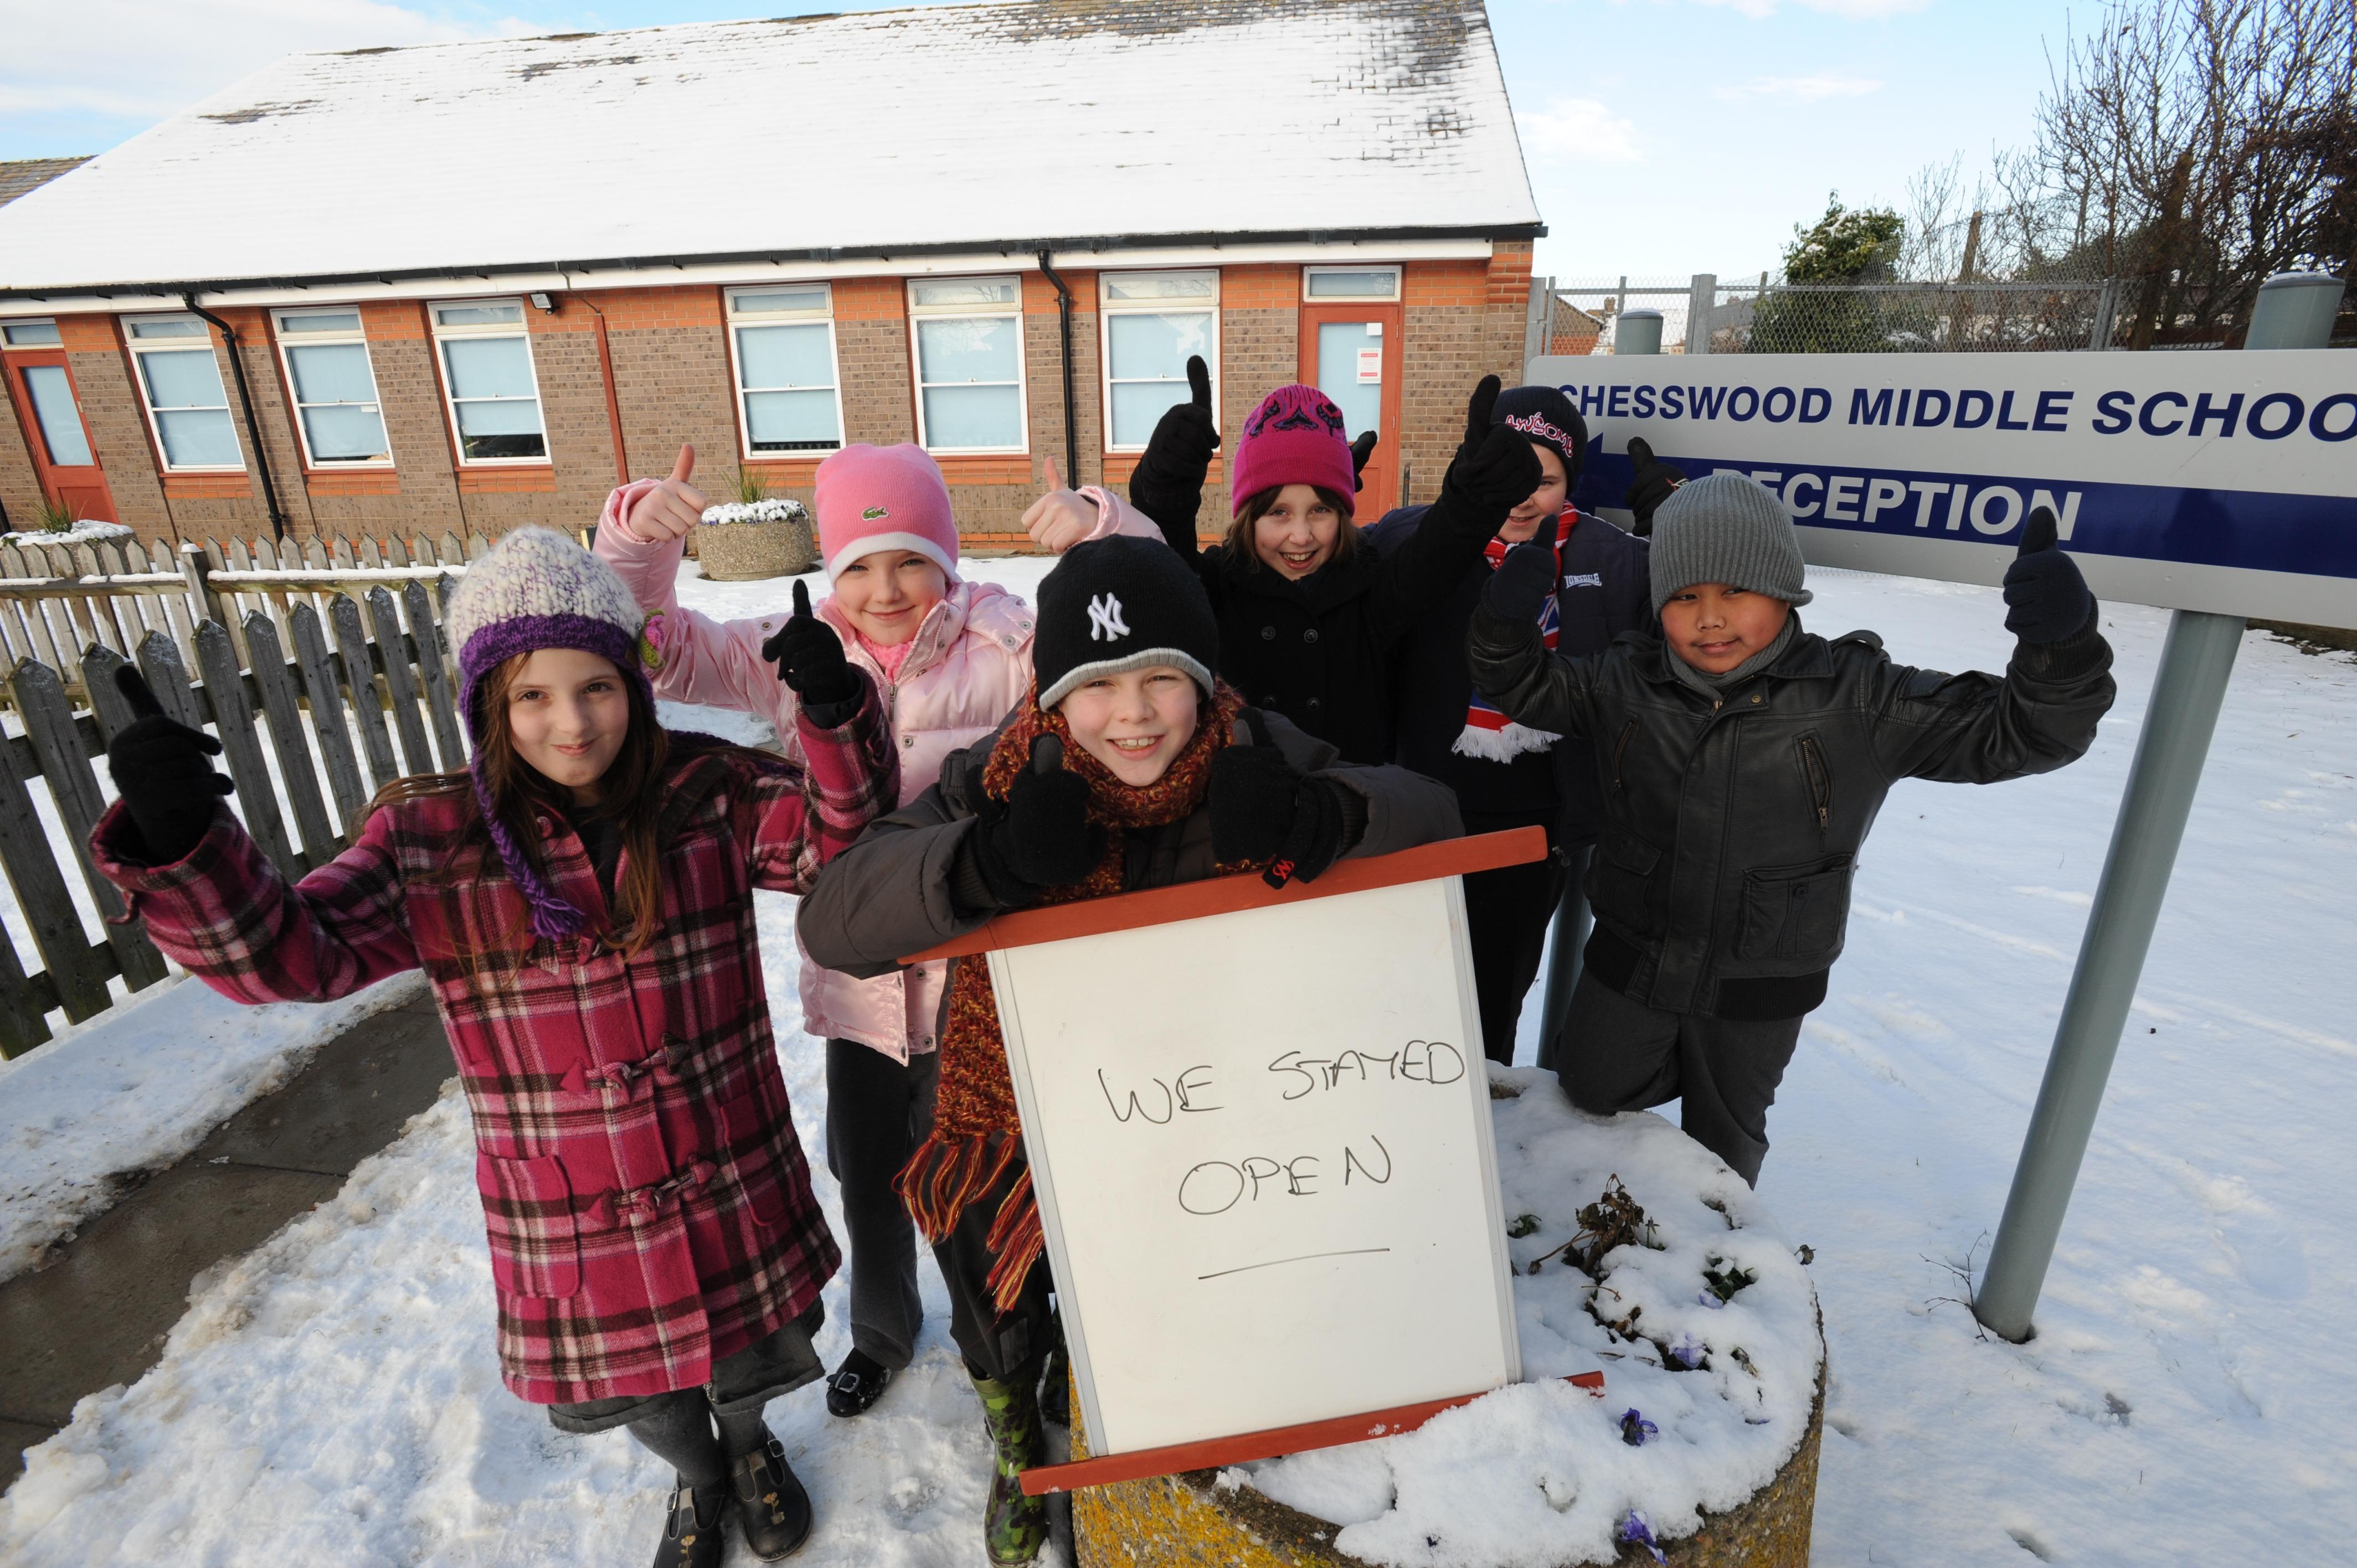 Chesswood School in Worthing stayed open during the snow, earning a thumbs up from pupils. Photo: Stephen Goodger